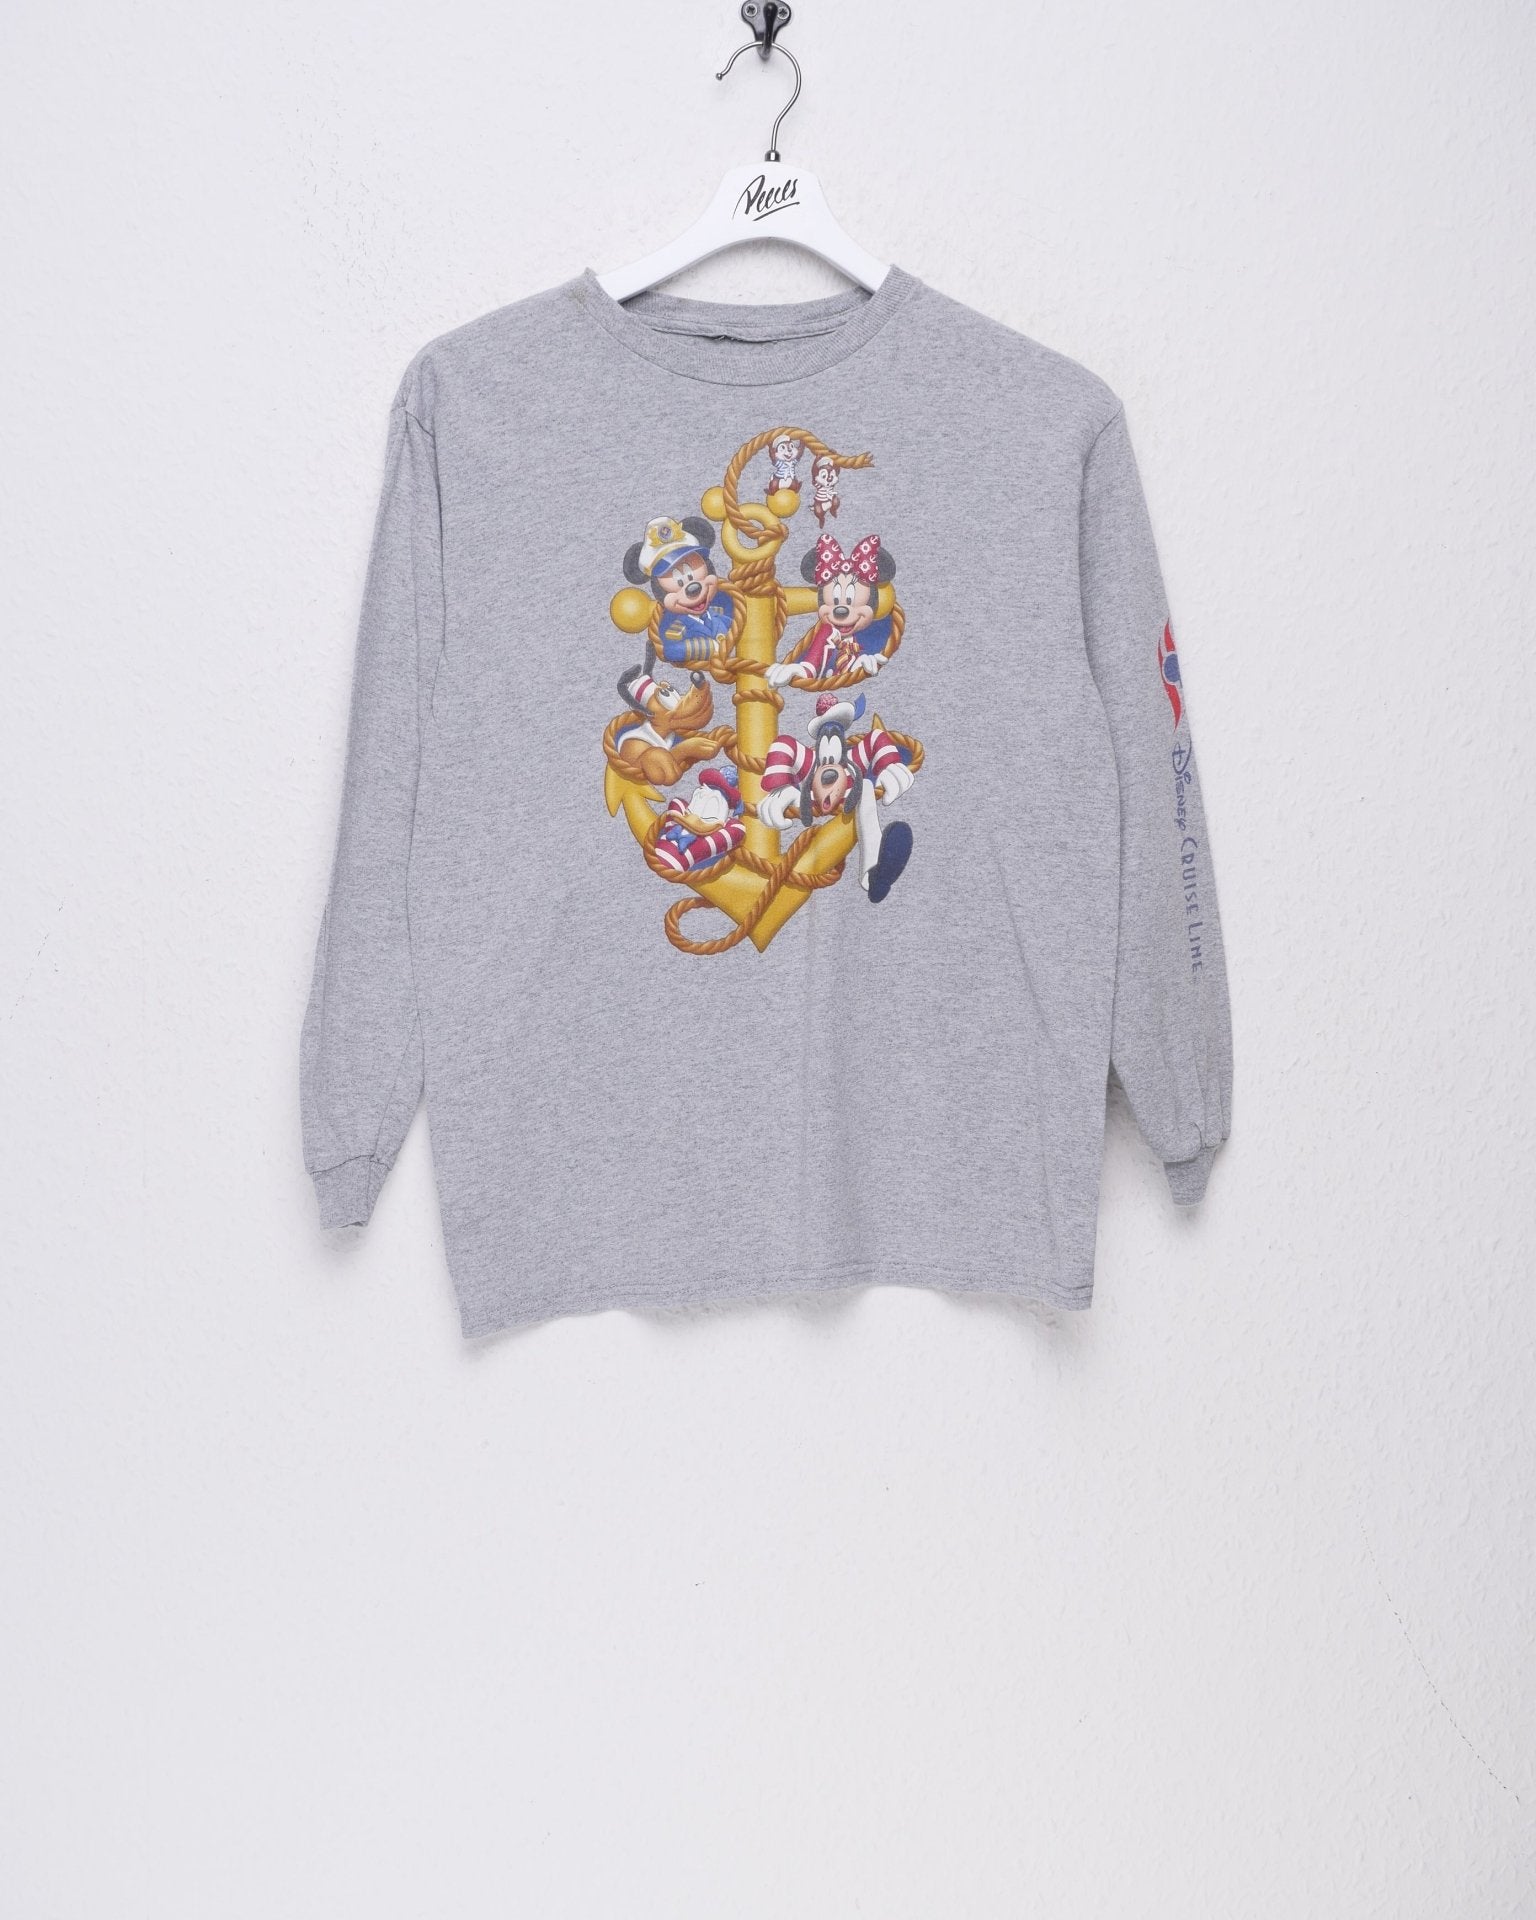 Printed 'Mickey Mouse' Graphic L/S Shirt - Peeces